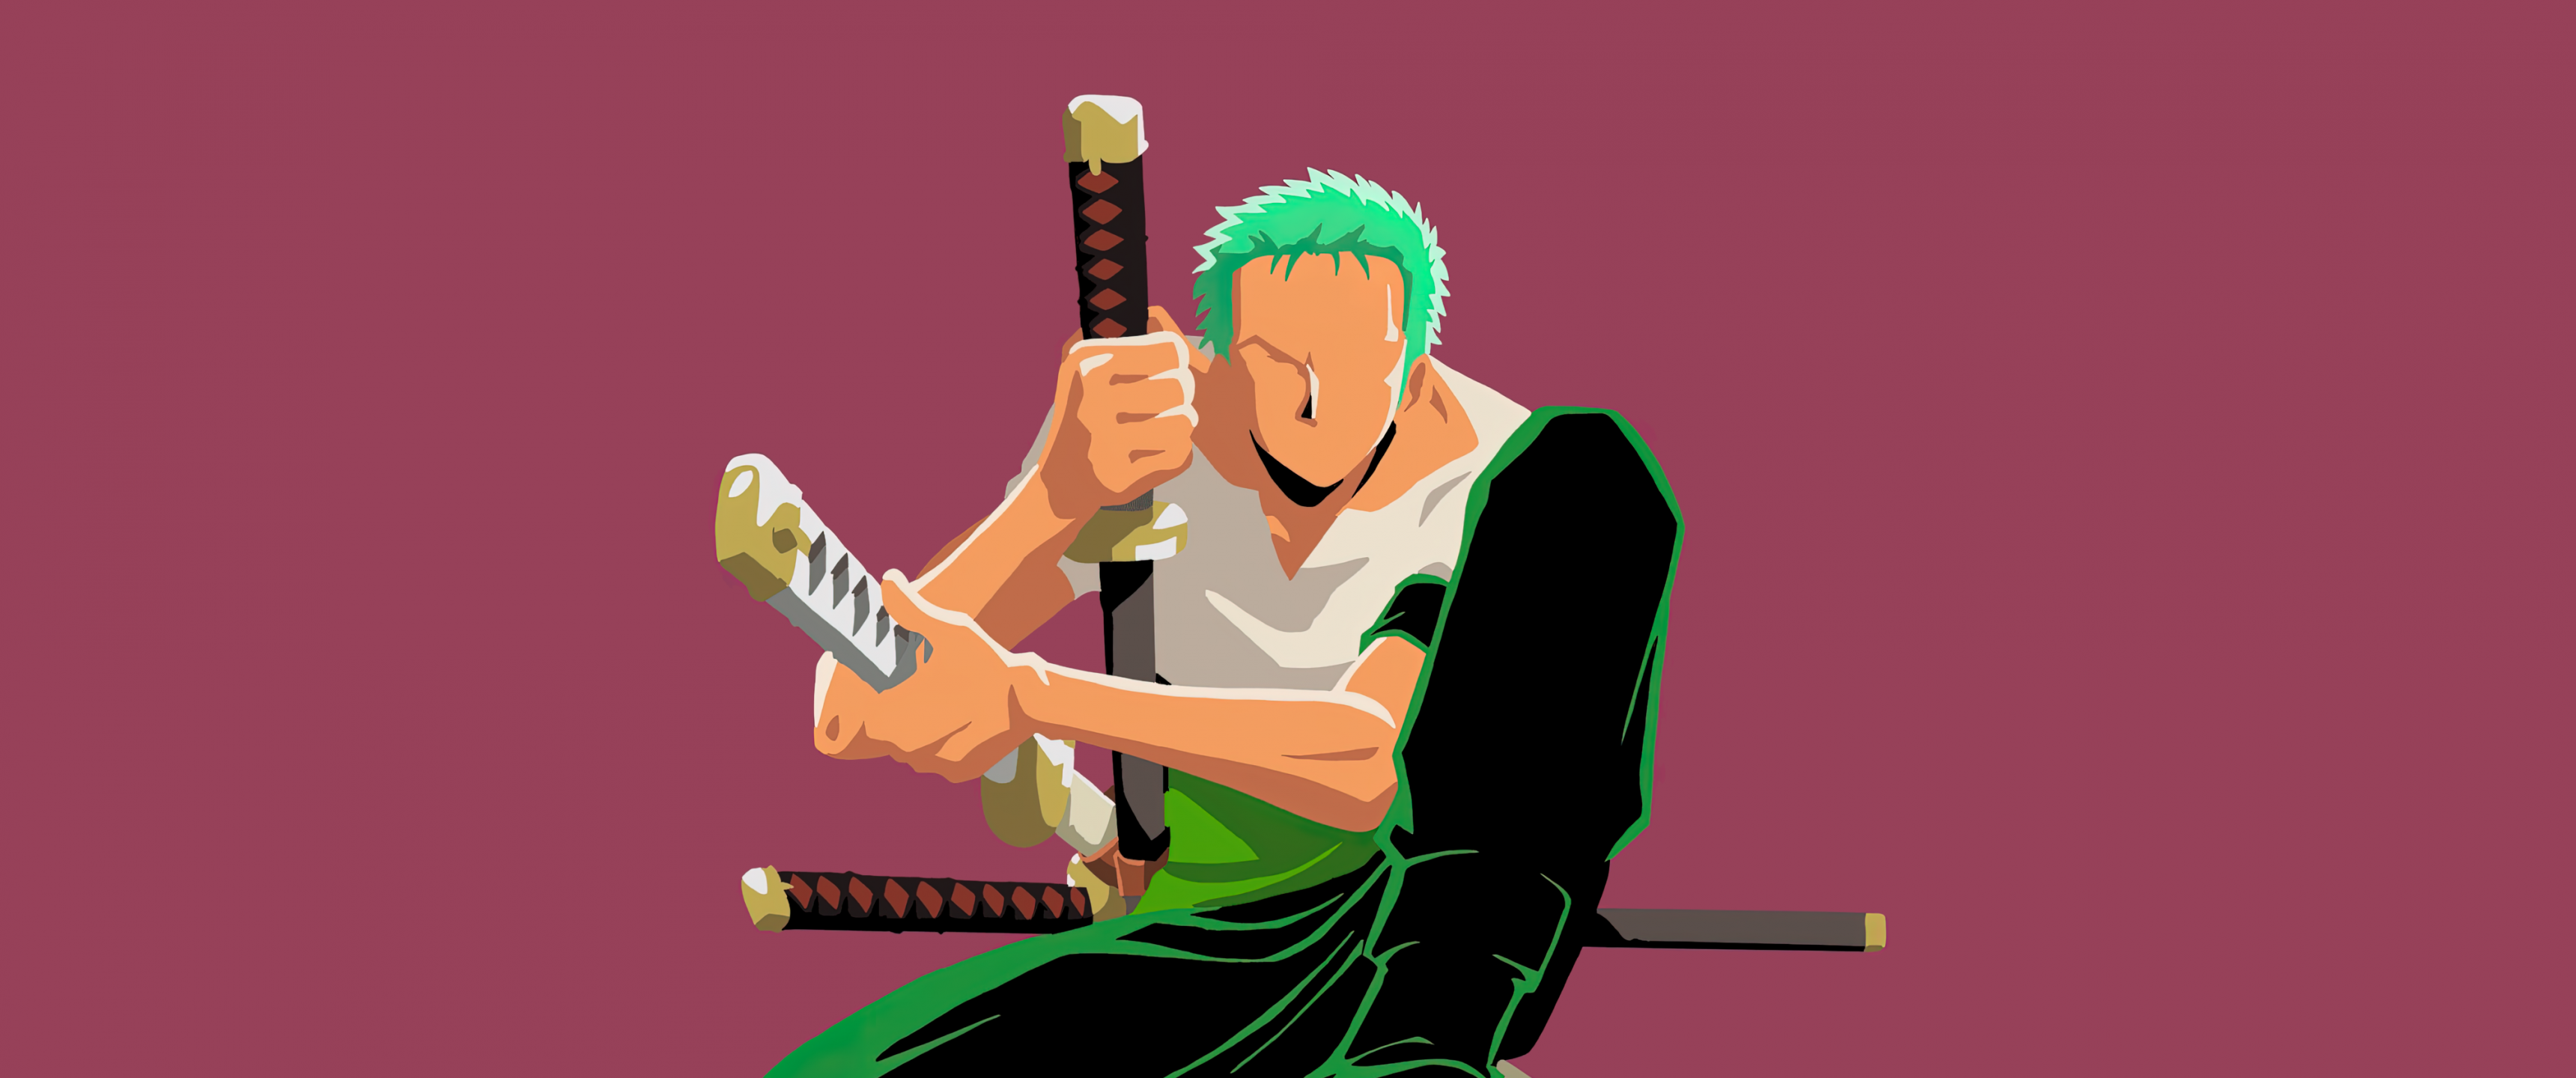 Master Swordsman Zoro competing with one of his toughest rivals